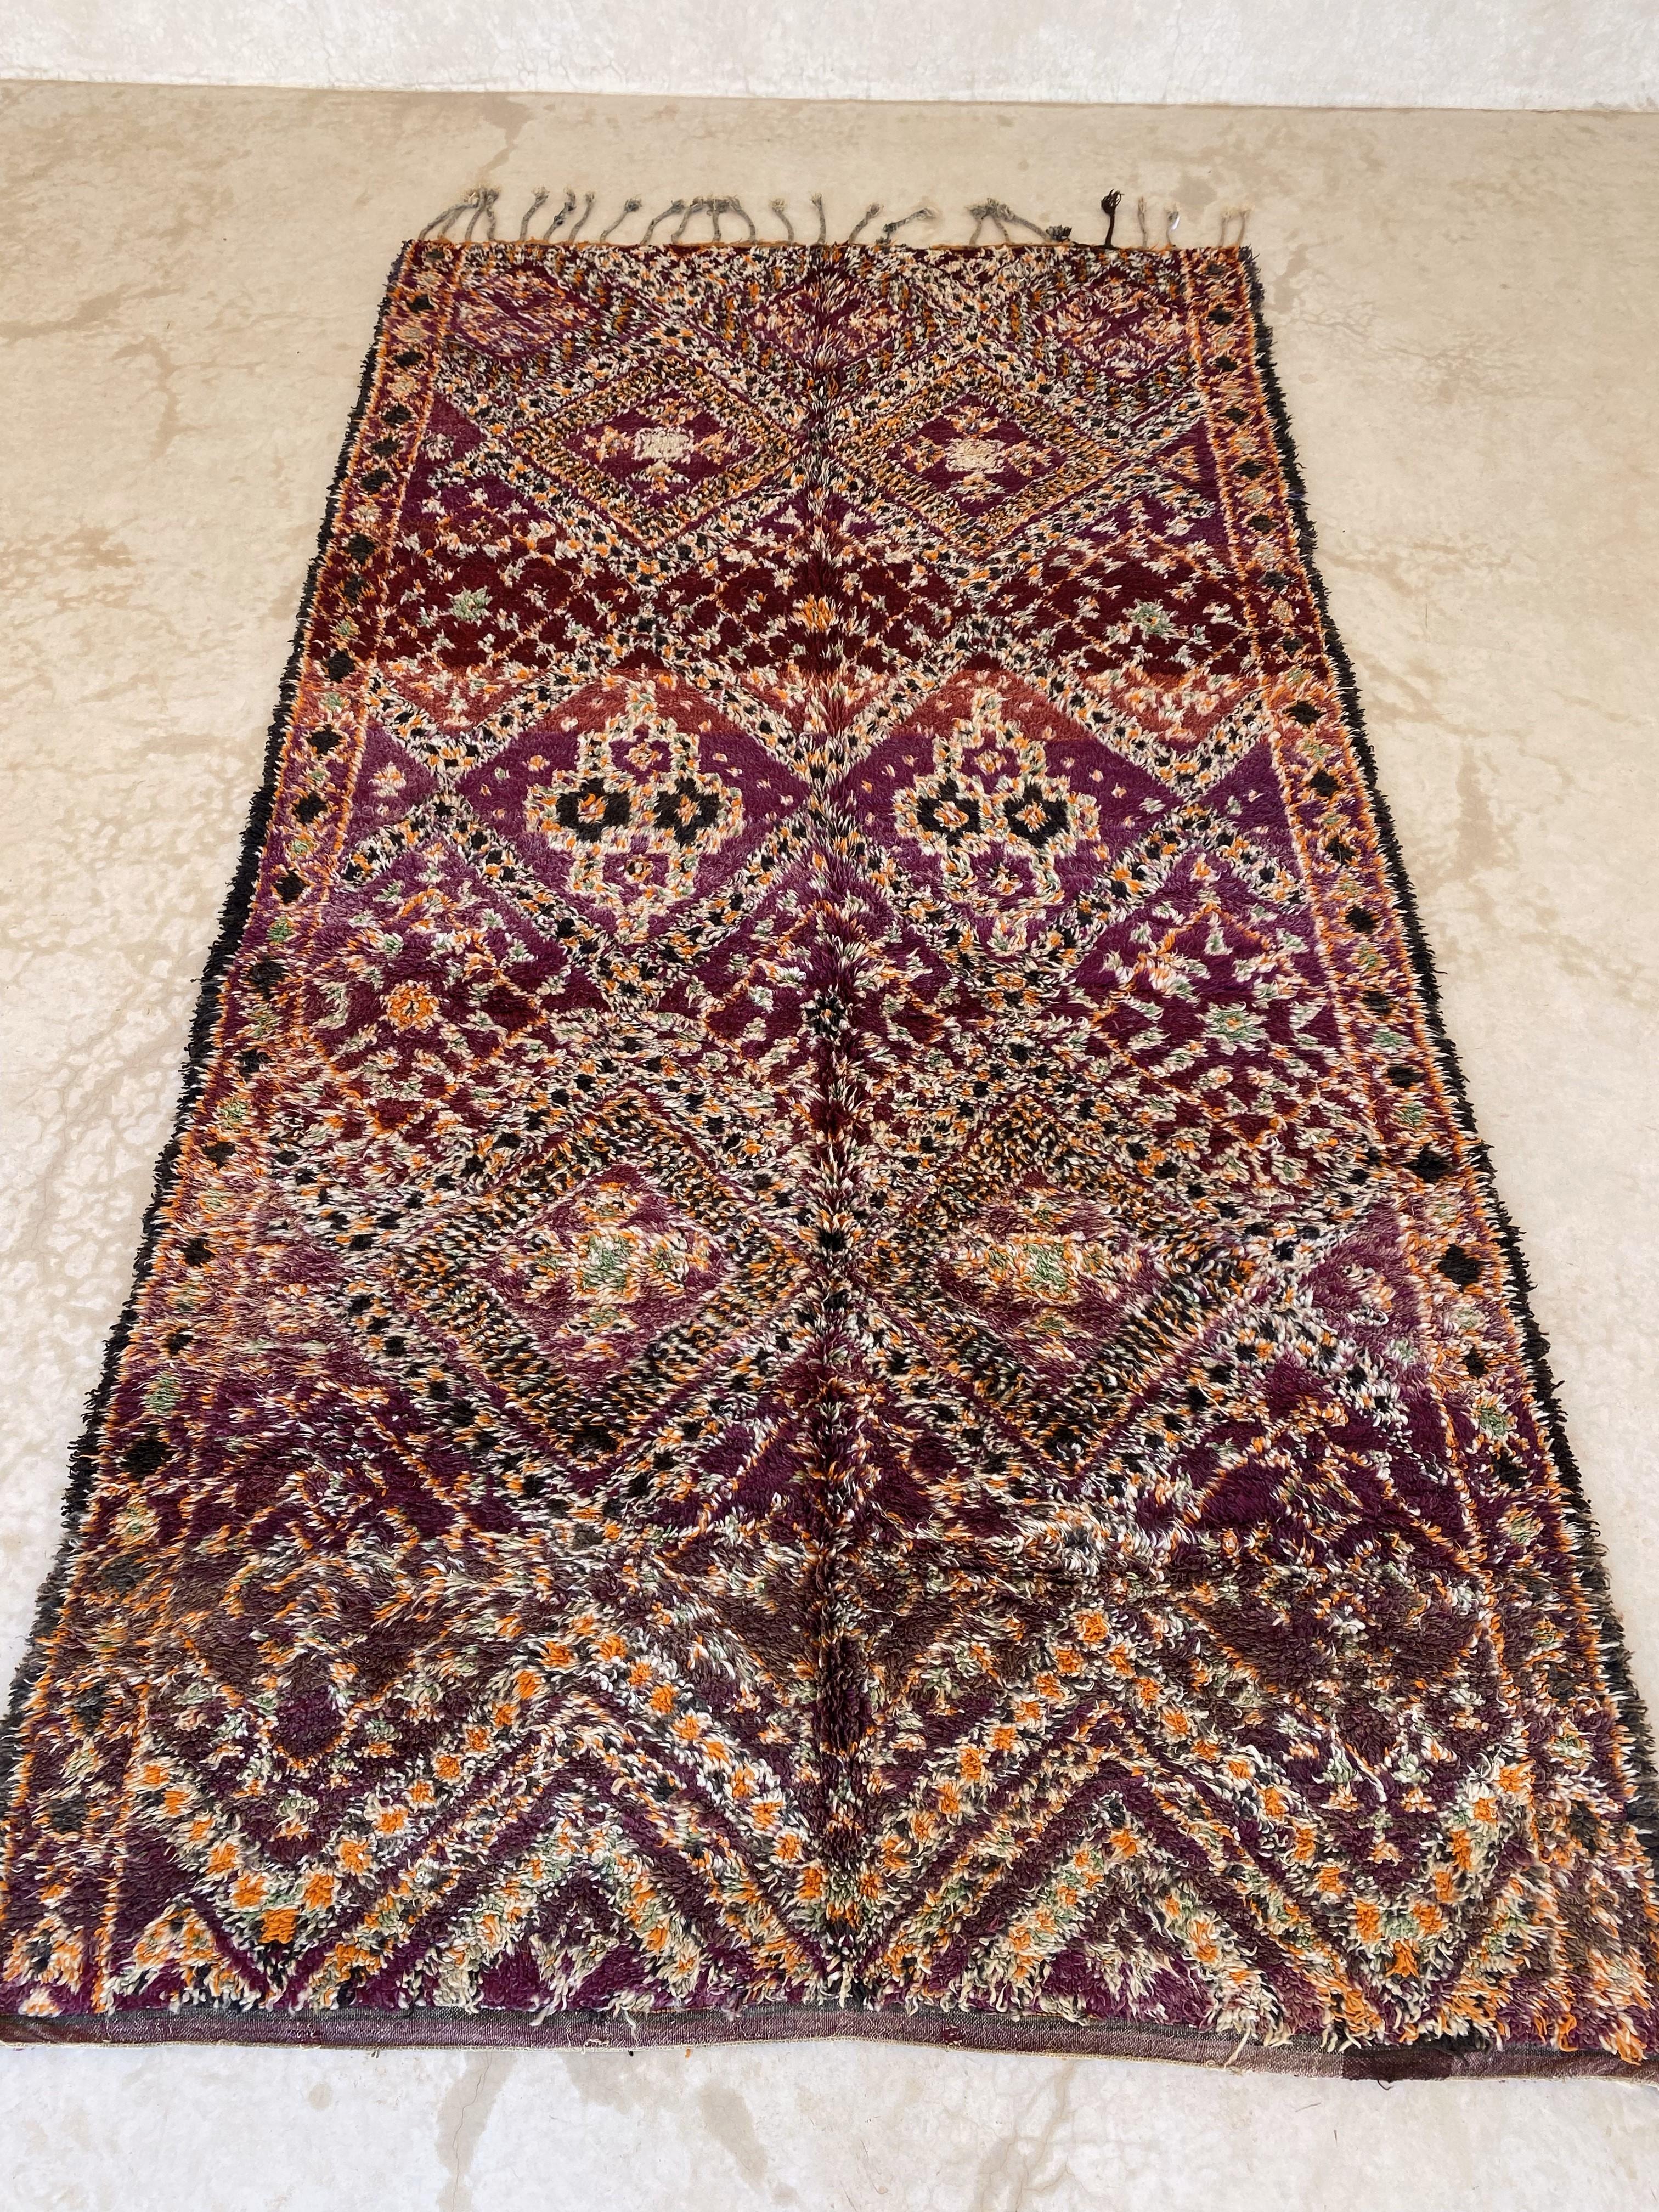 This vintage Beni Mguild rug is gorgeous! The perfect bohemian rug to bring warmth and character to your space!

The background color of this rug is a purple but I guess you can tell from the pictures attached that it shows different shades. The